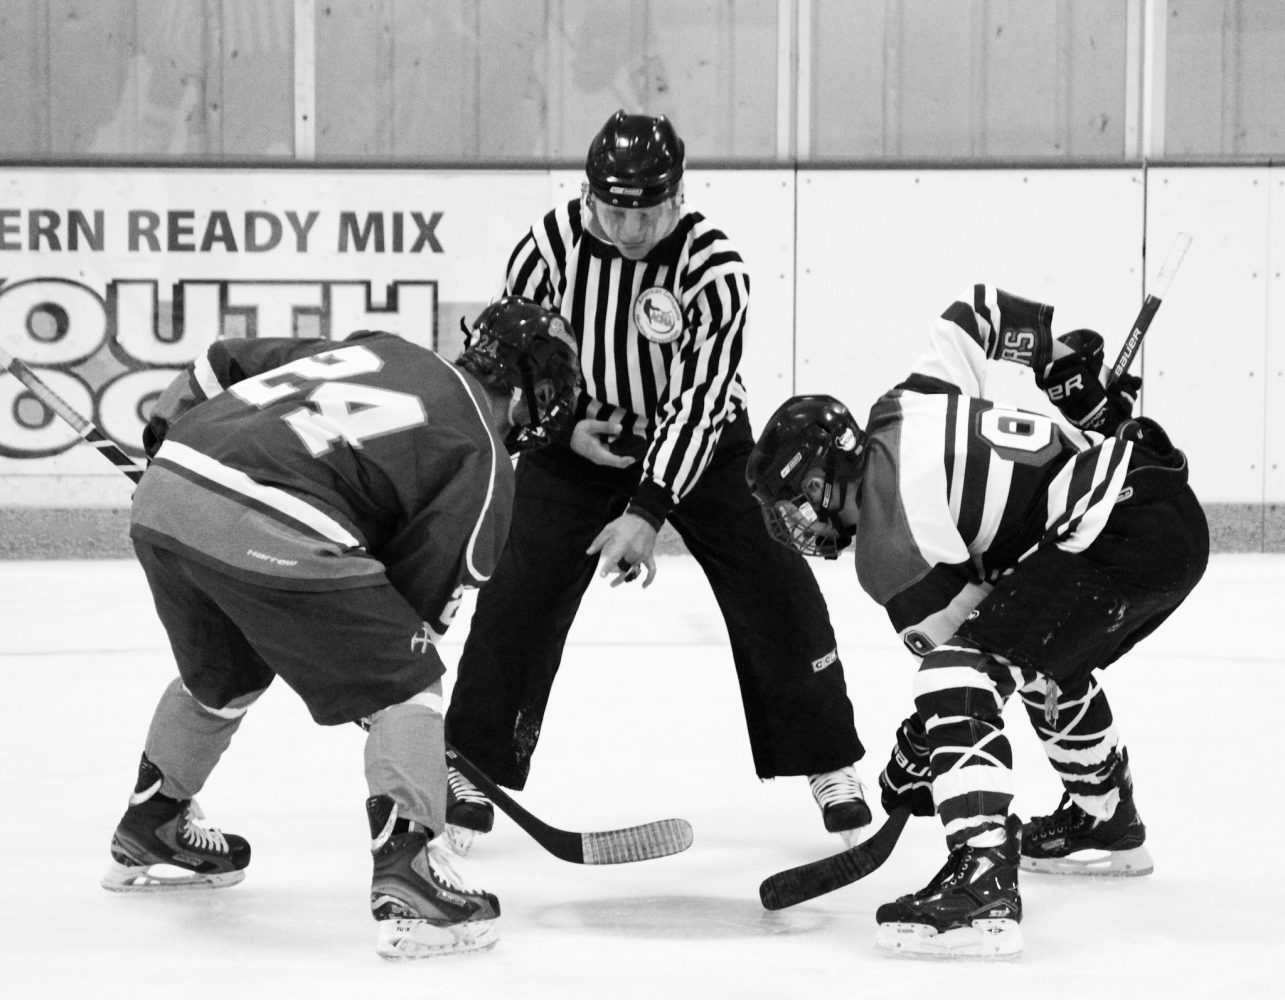 Winona States Club Hockey team invites each and every student to any of their home games held at Bud King Arena in Winona, MN. Photo Credit: Jesus Cazares